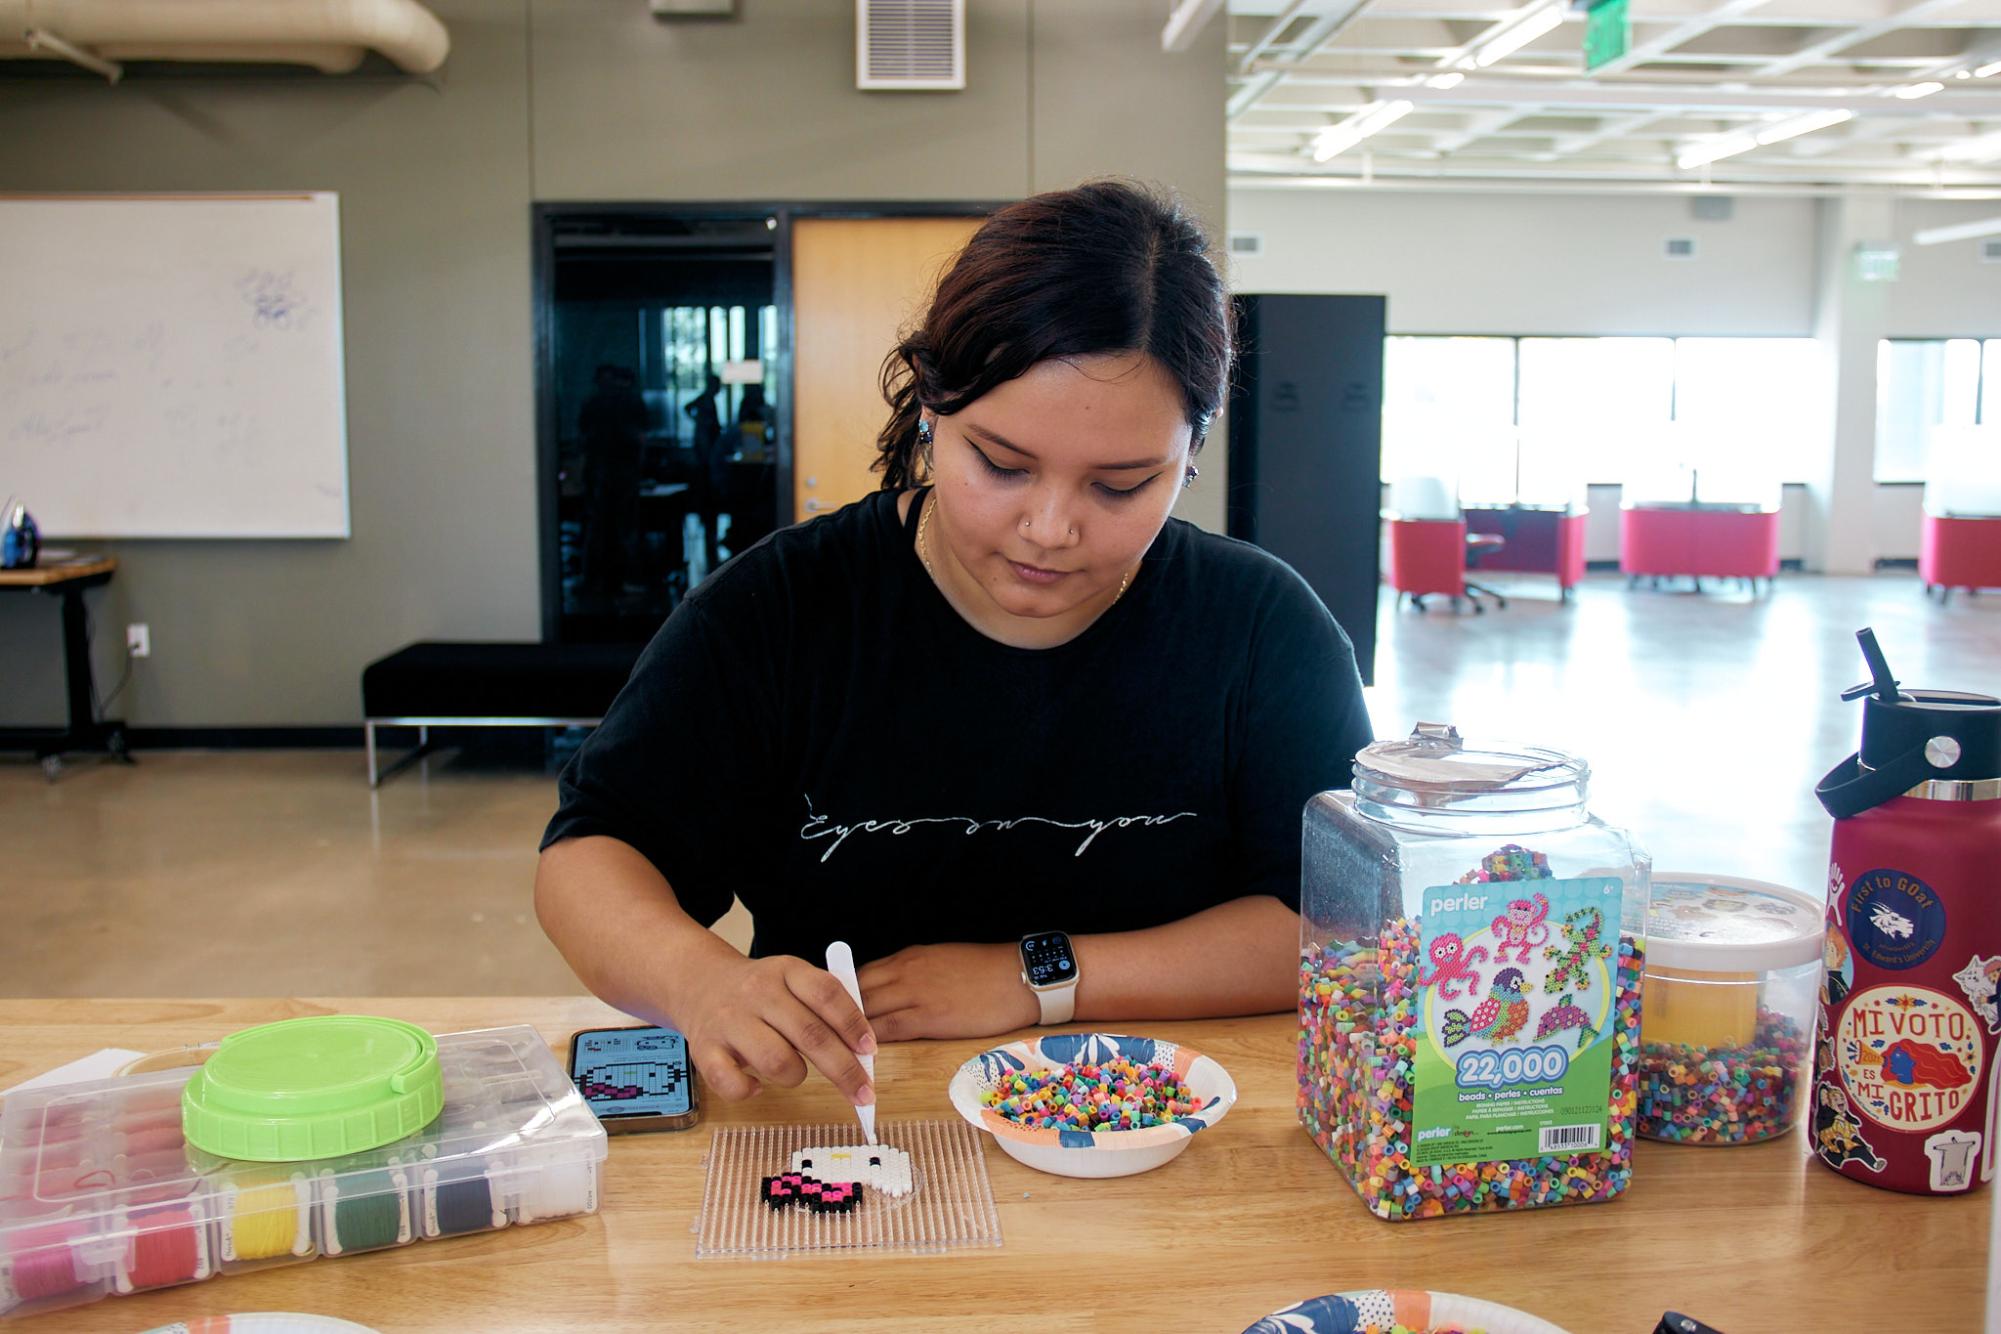 Library aid Patricia Martinez demonstrates pixel art by creating a Hello Kitty made of perler beads.